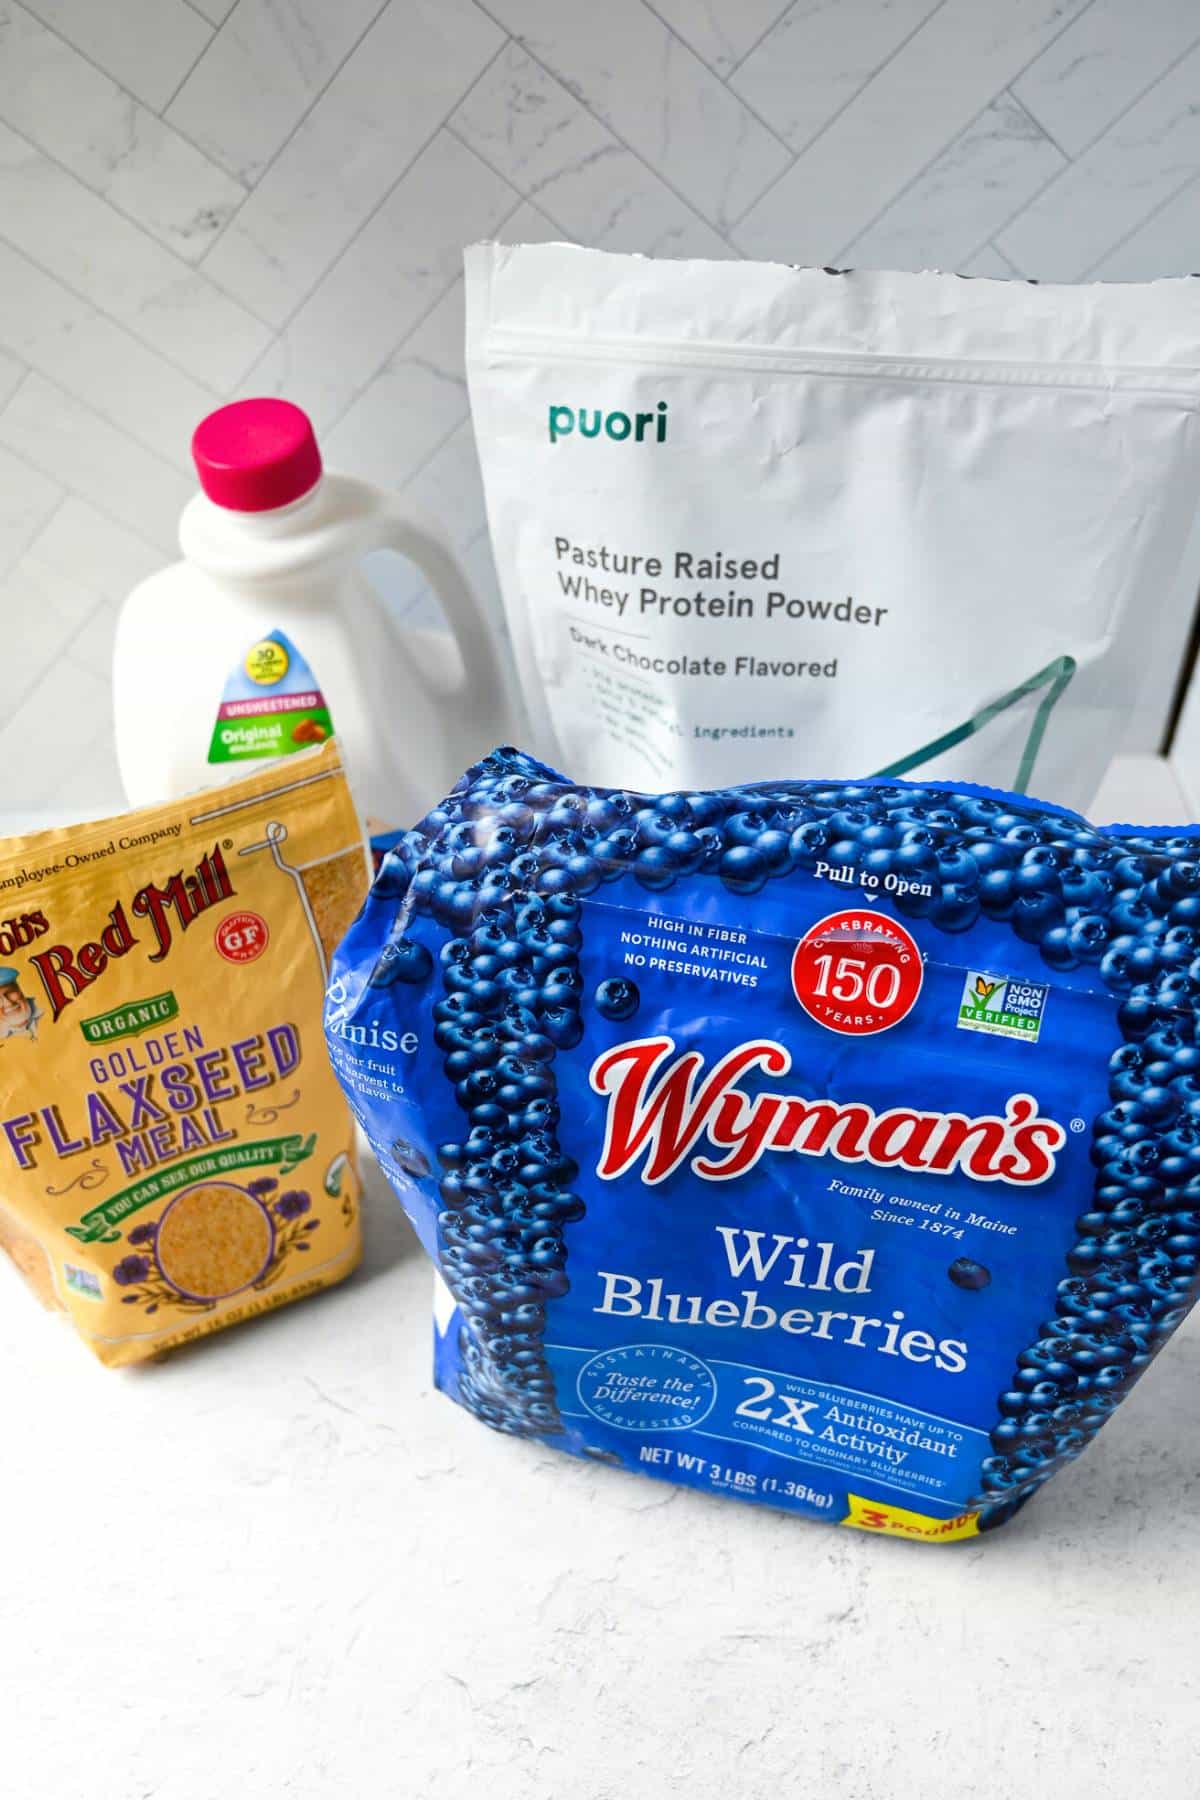 ingredients for making a blueberry protein shake: milk, wild blueberries, protein powder, and flaxseed